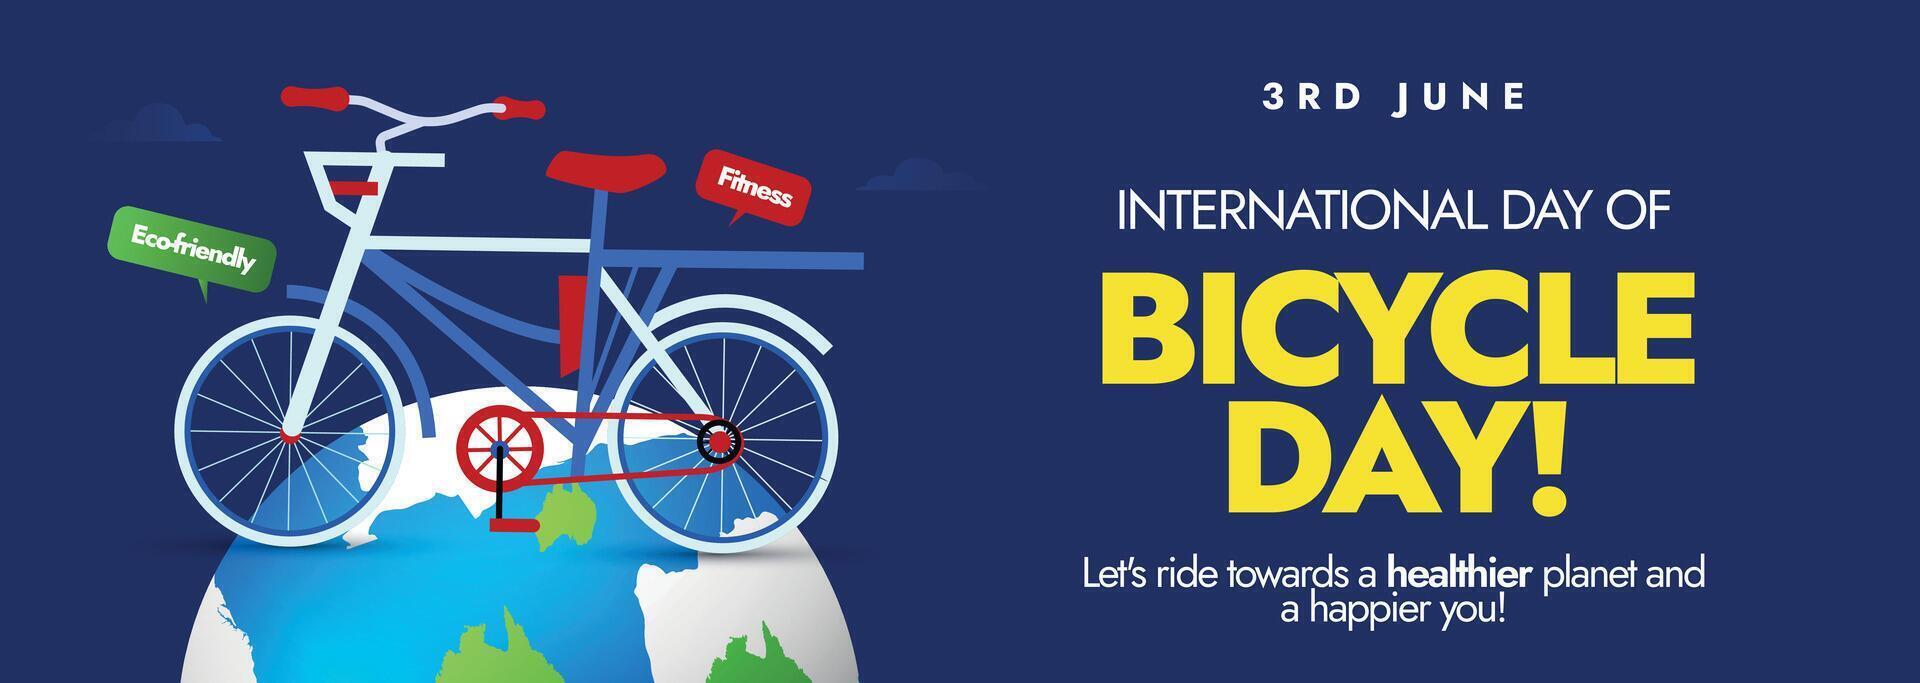 World Bicycle day. 3rd June World bicycle day event announcement cover banner, card, post with a bicycle on earth globe. This day raise awareness about bicycles as sustainable mode of transportation. vector